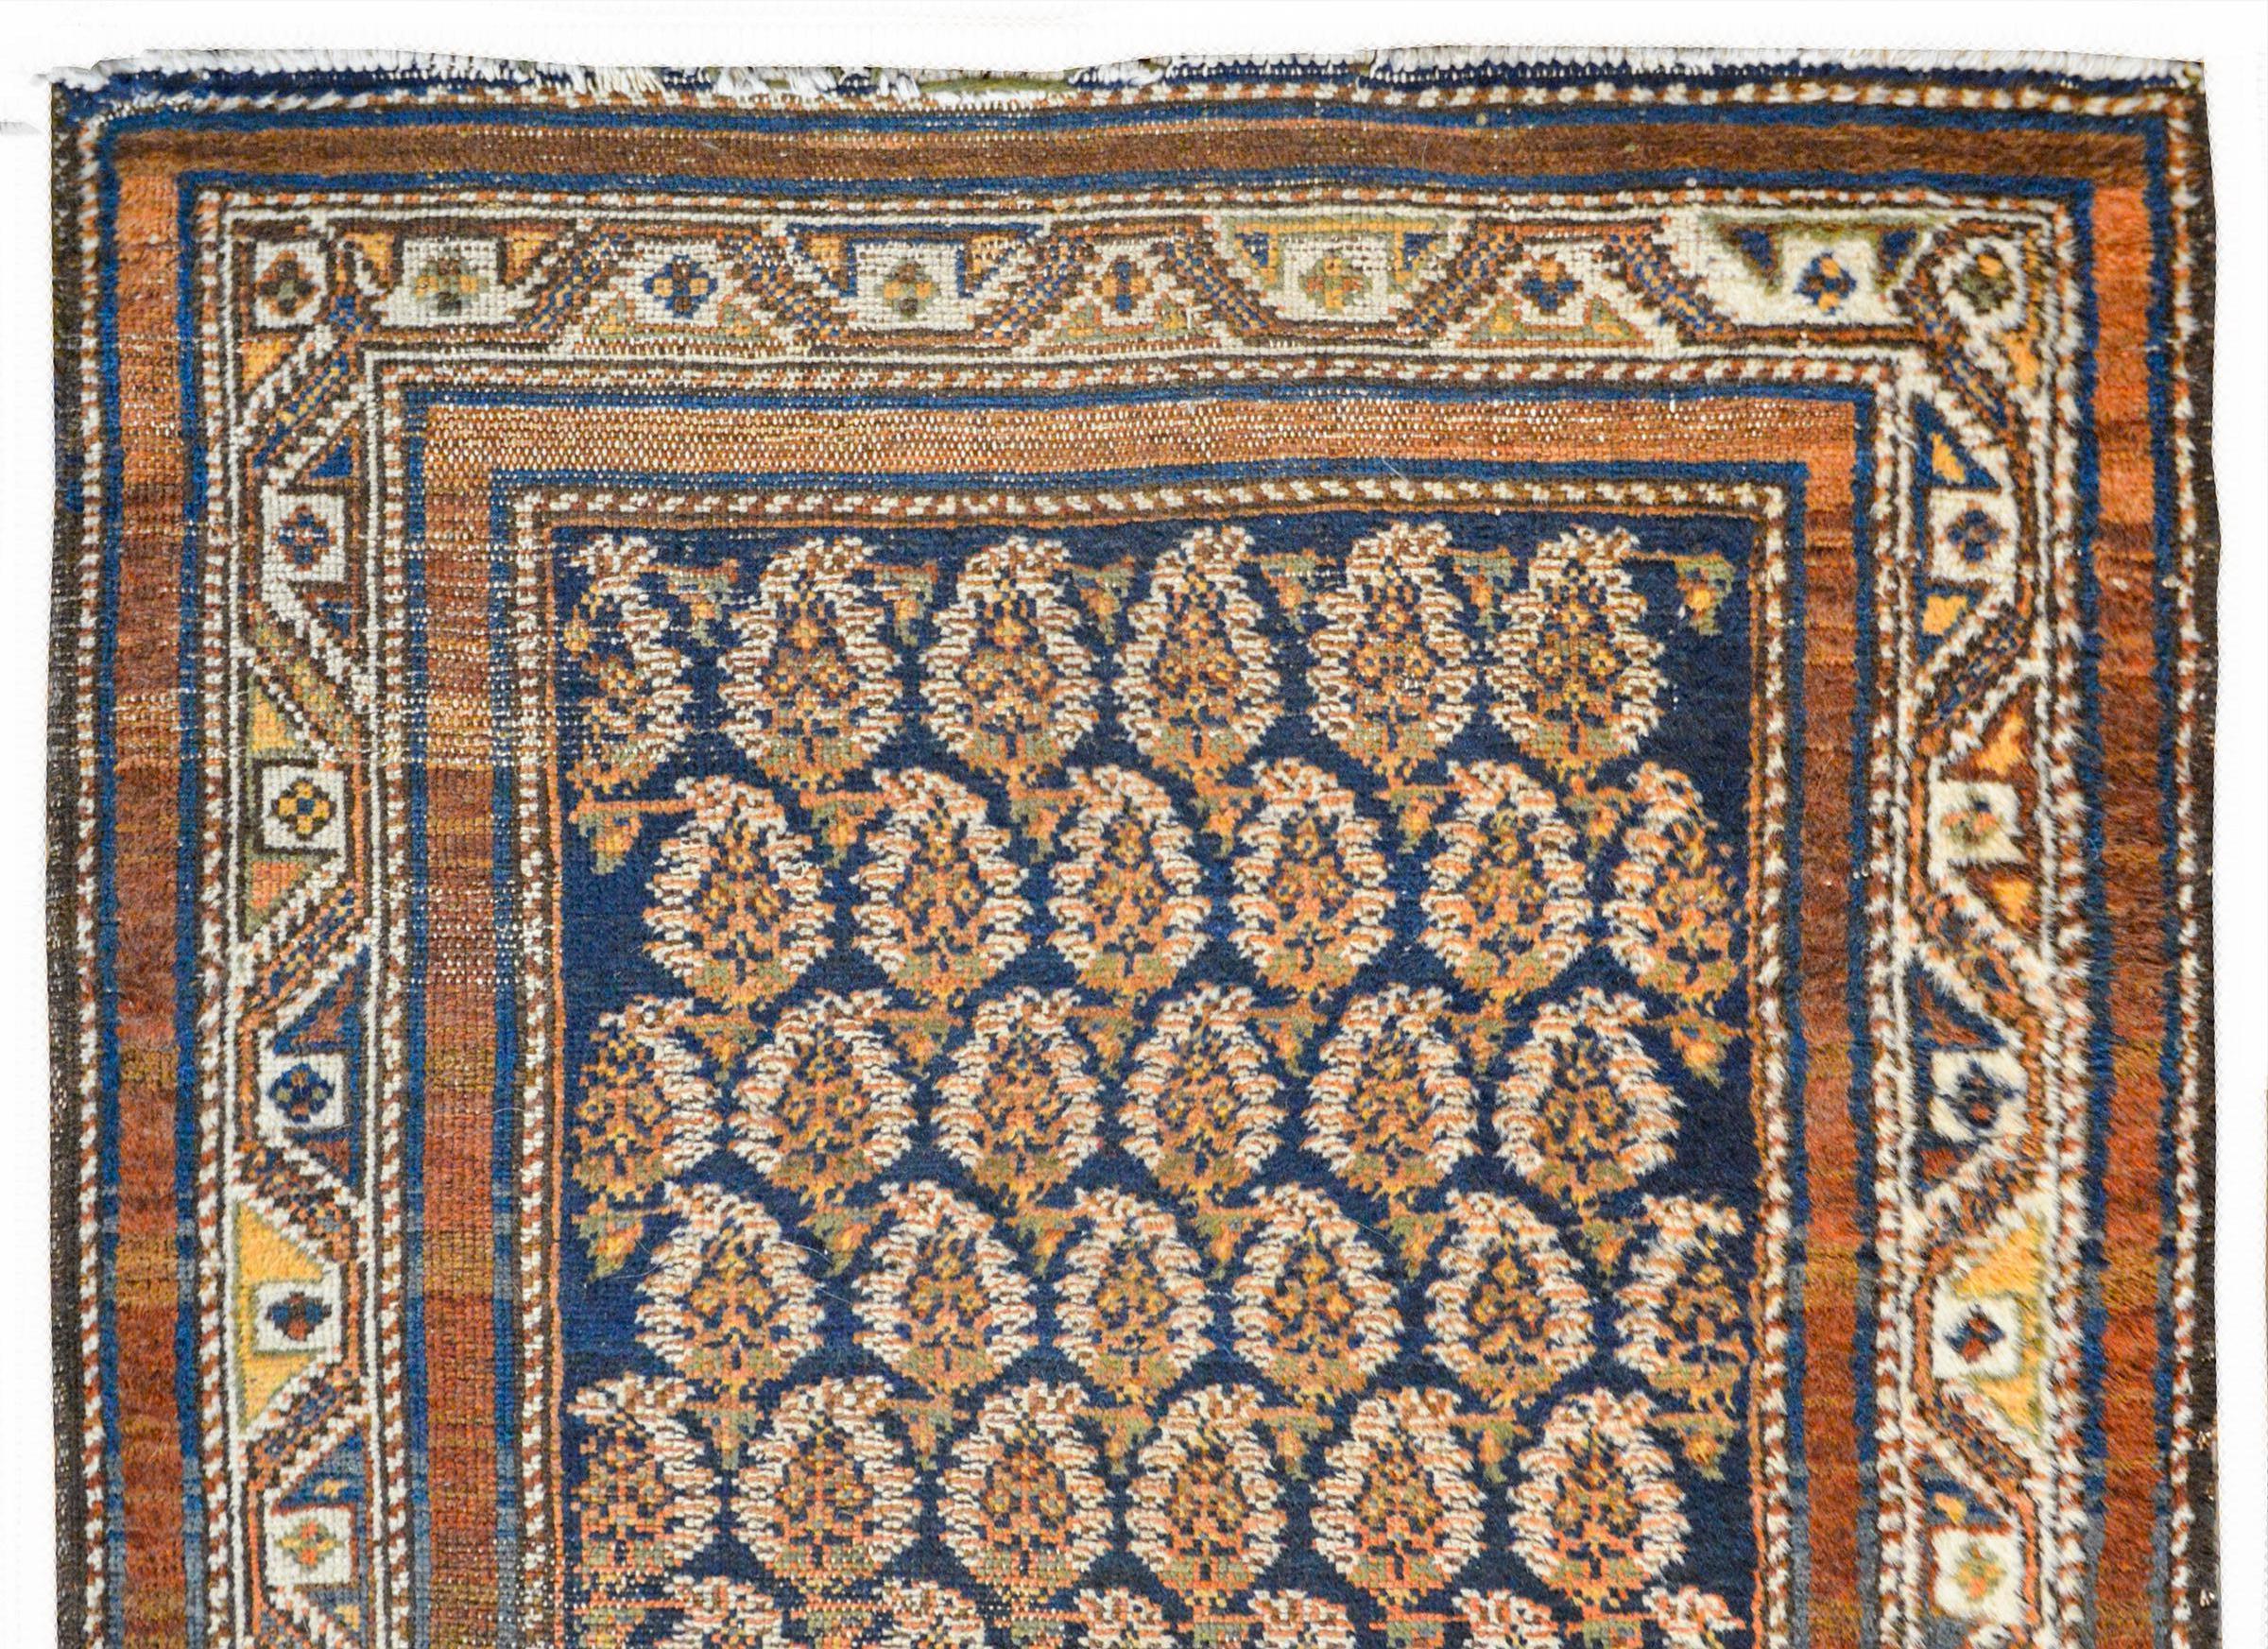 An extraordinary early 20th century Persian Seraband runner with an all-over paisley pattern woven in multiple colors against a dark indigo background surrounded by a border with a central stylized floral and scrolling vine pattern flanked by pairs